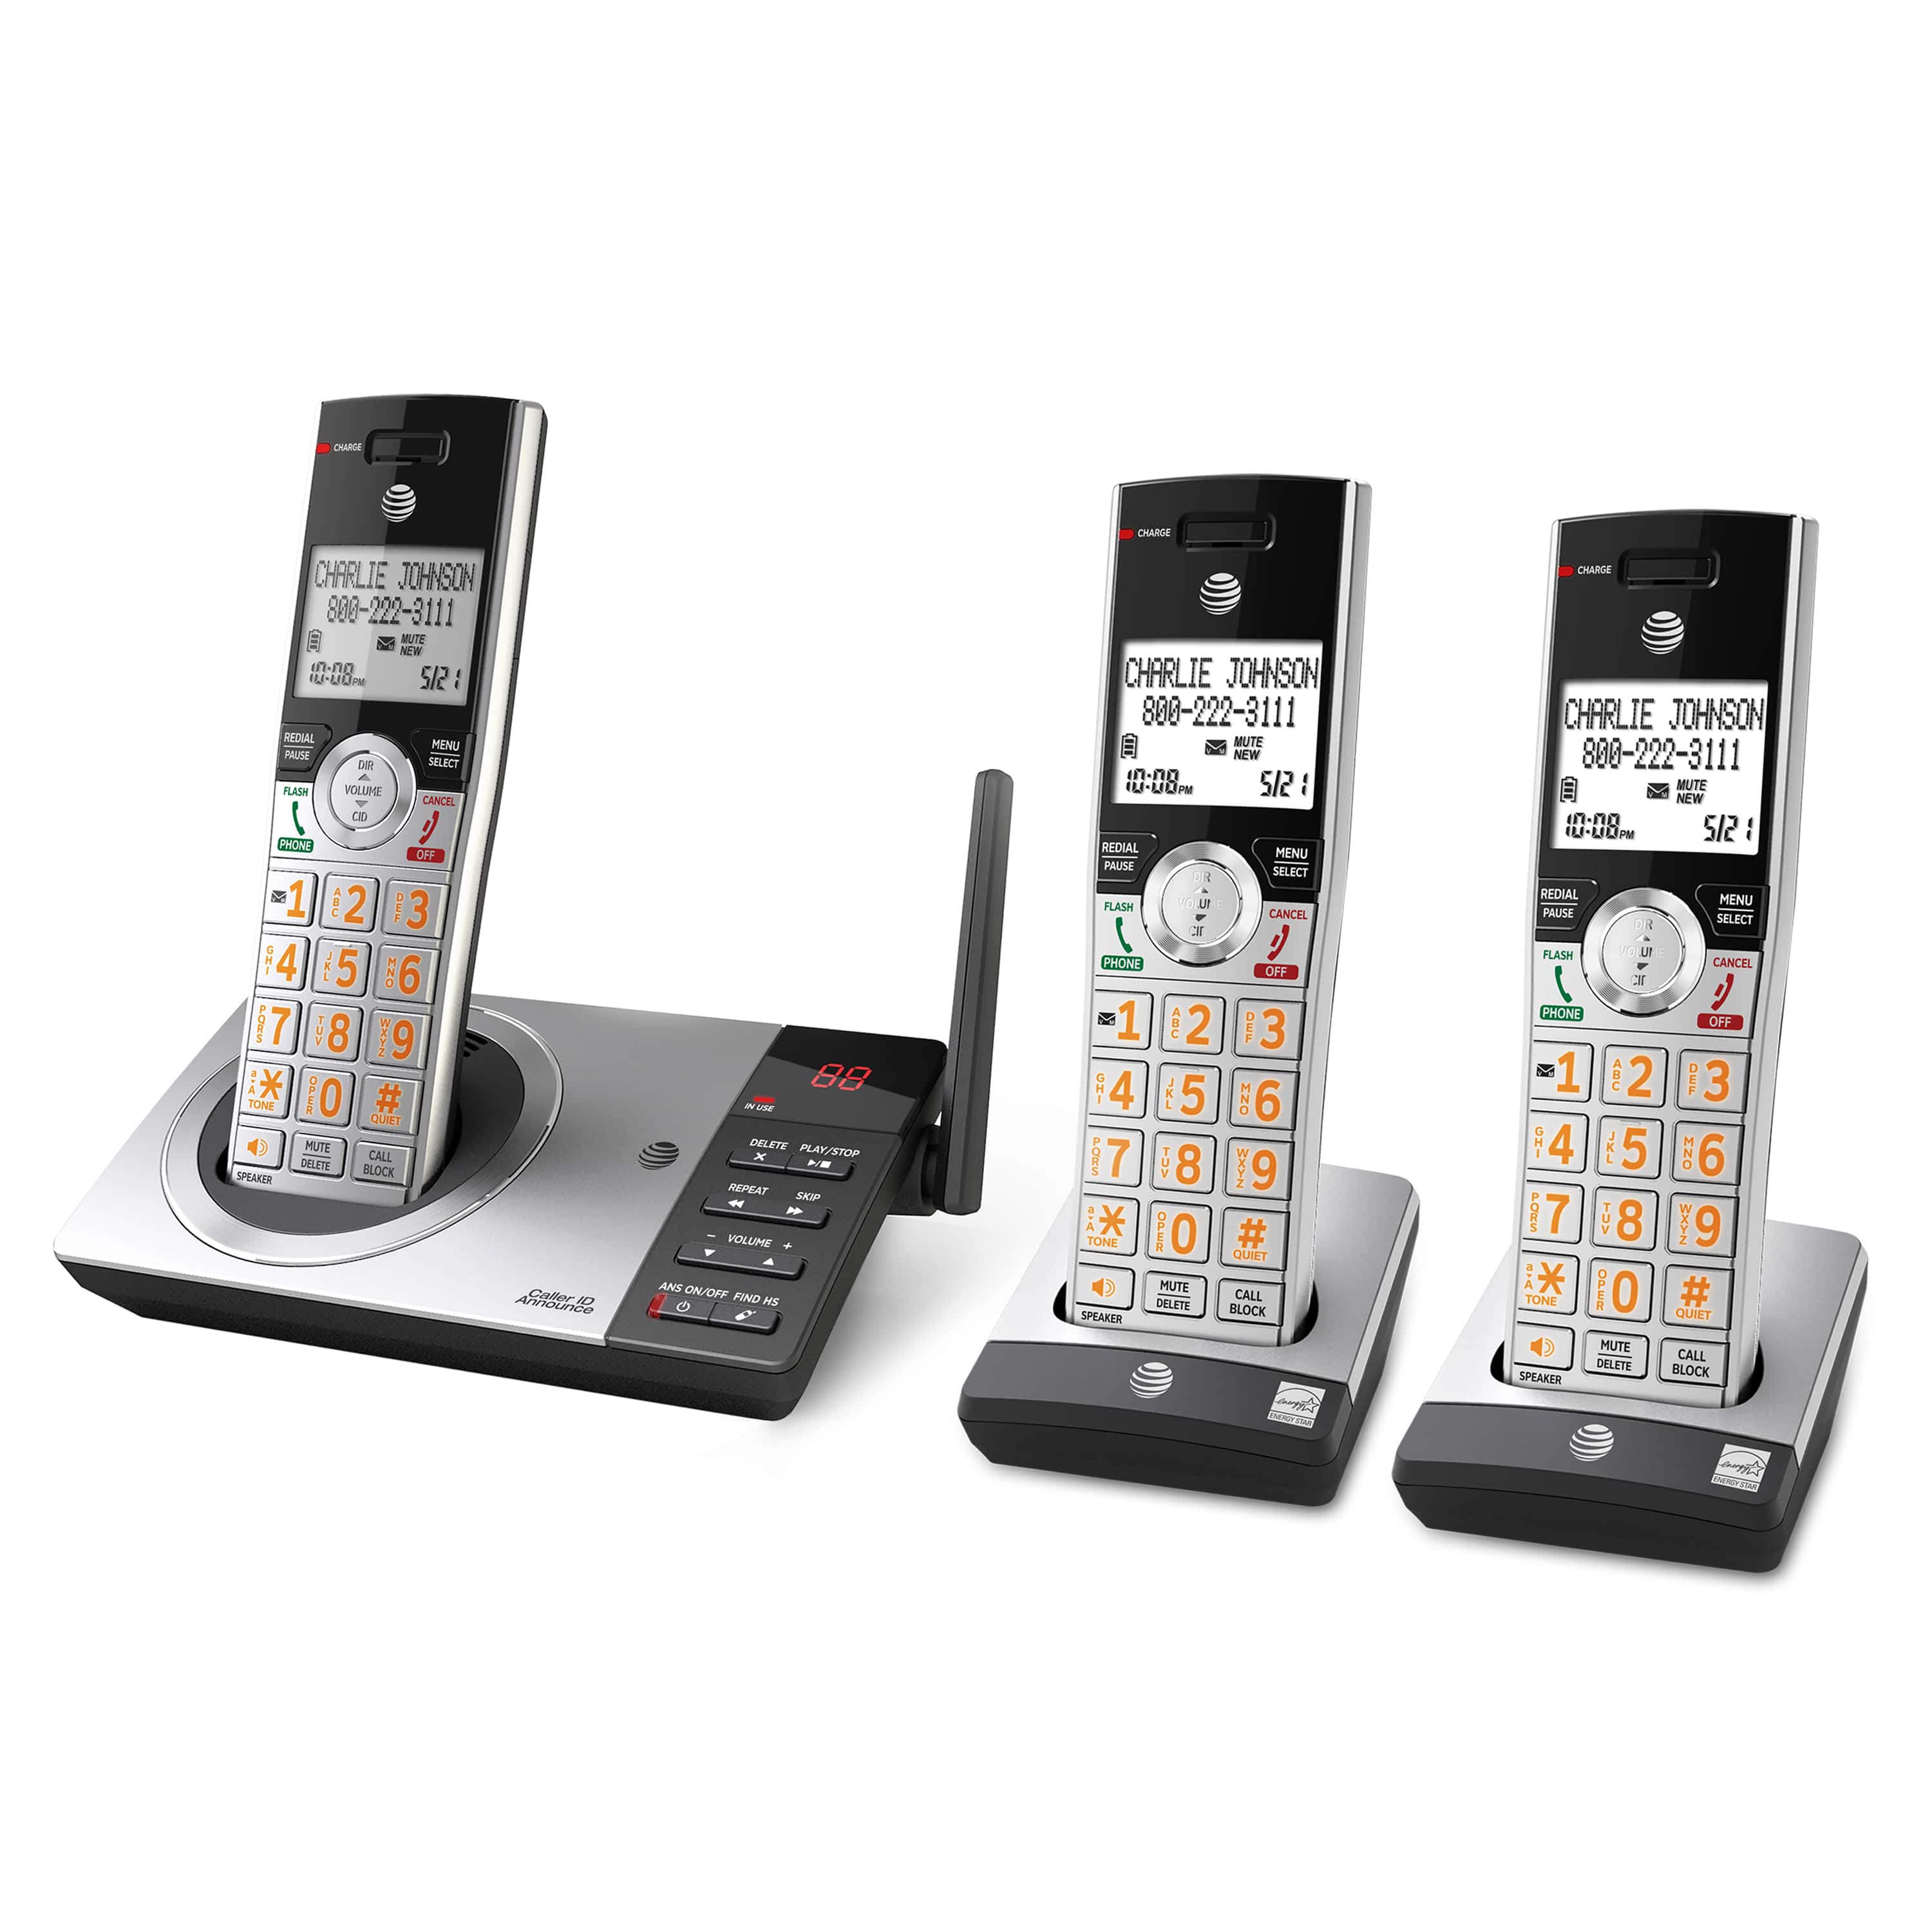 3 handset cordless answering system with smart call blocker - view 2